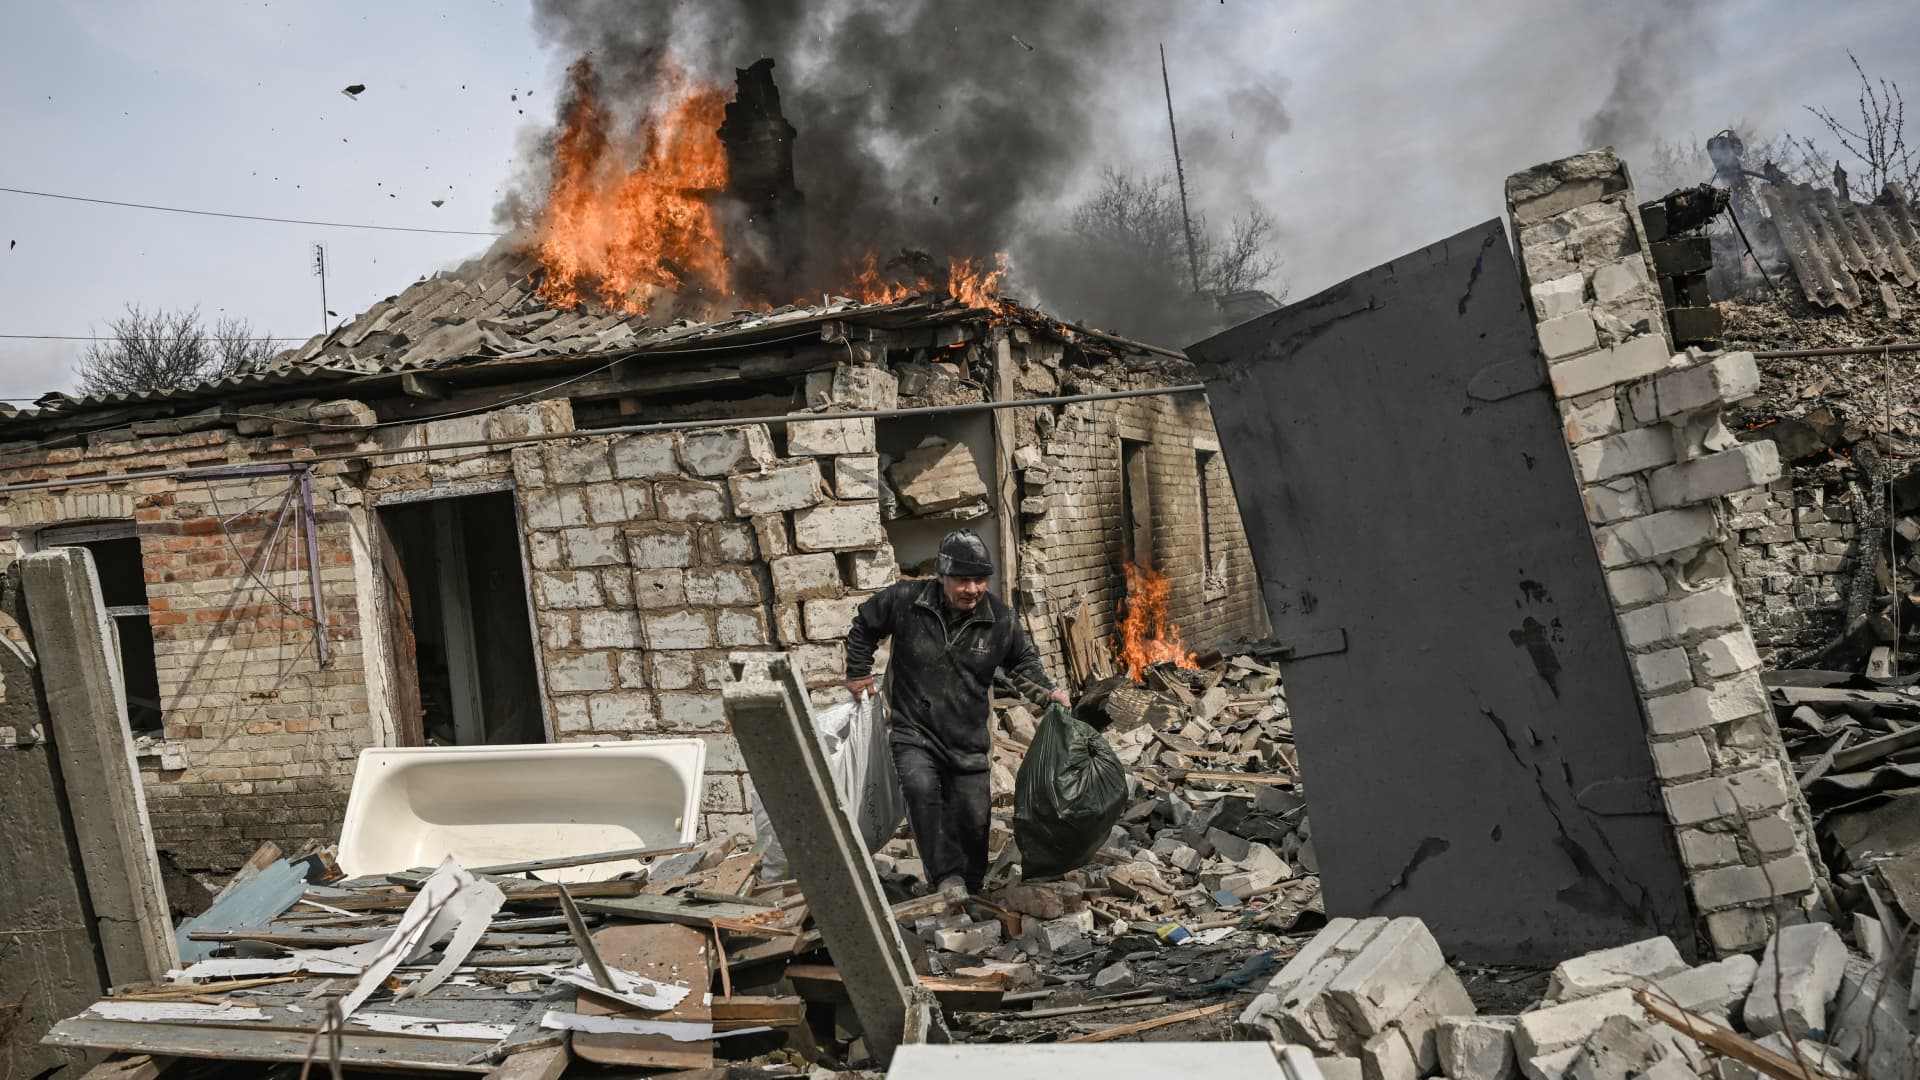 A house burns after shelling in the town of Chasiv Yar, near Bakhmut, on March 21, 2023.